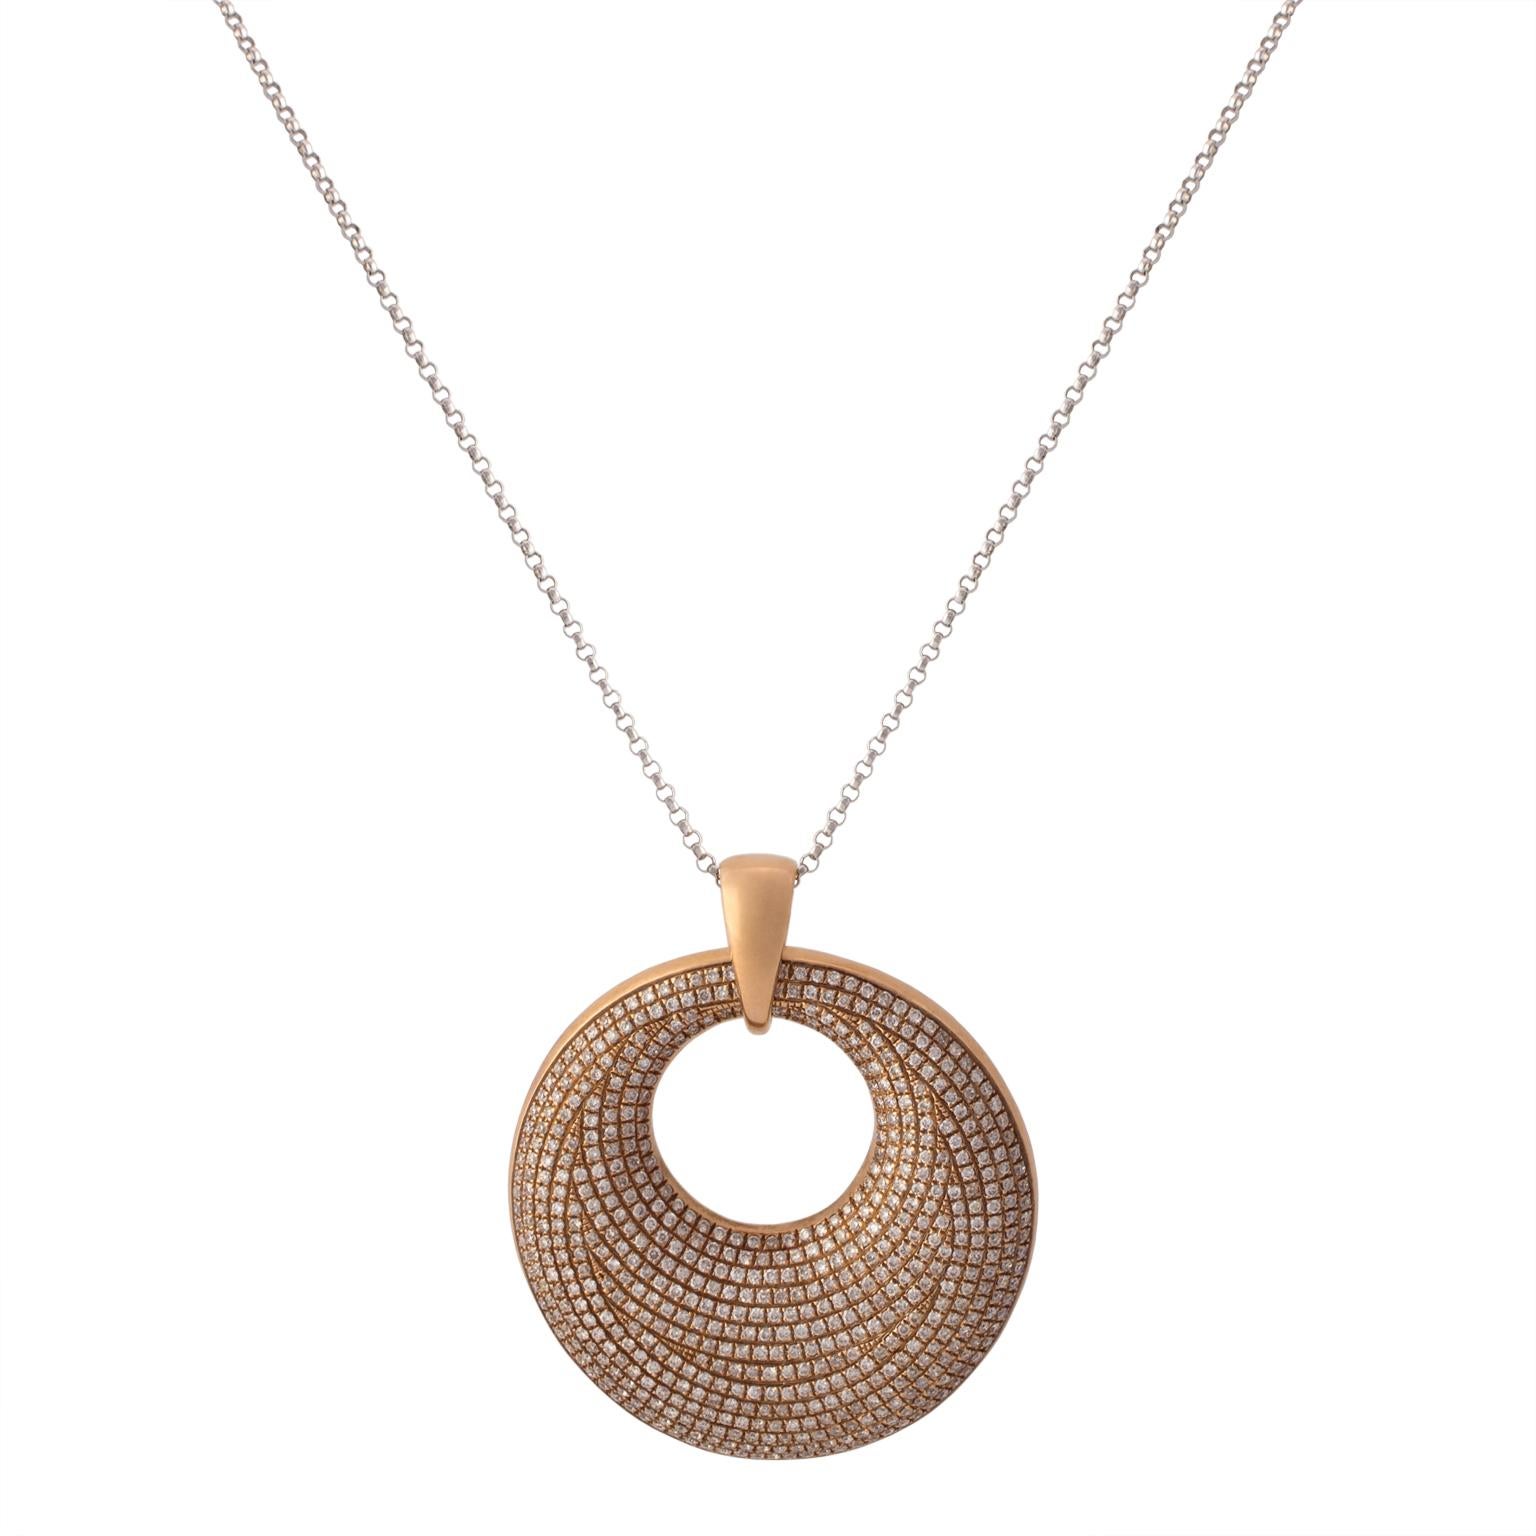 Rose gold pendant in the shape of an annulus, decorated with diamond pave, 550 round brilliant cut diamonds totalling 1.50 carats in weight. Together with a white gold chain.
Length 40 cm (15.75 in)